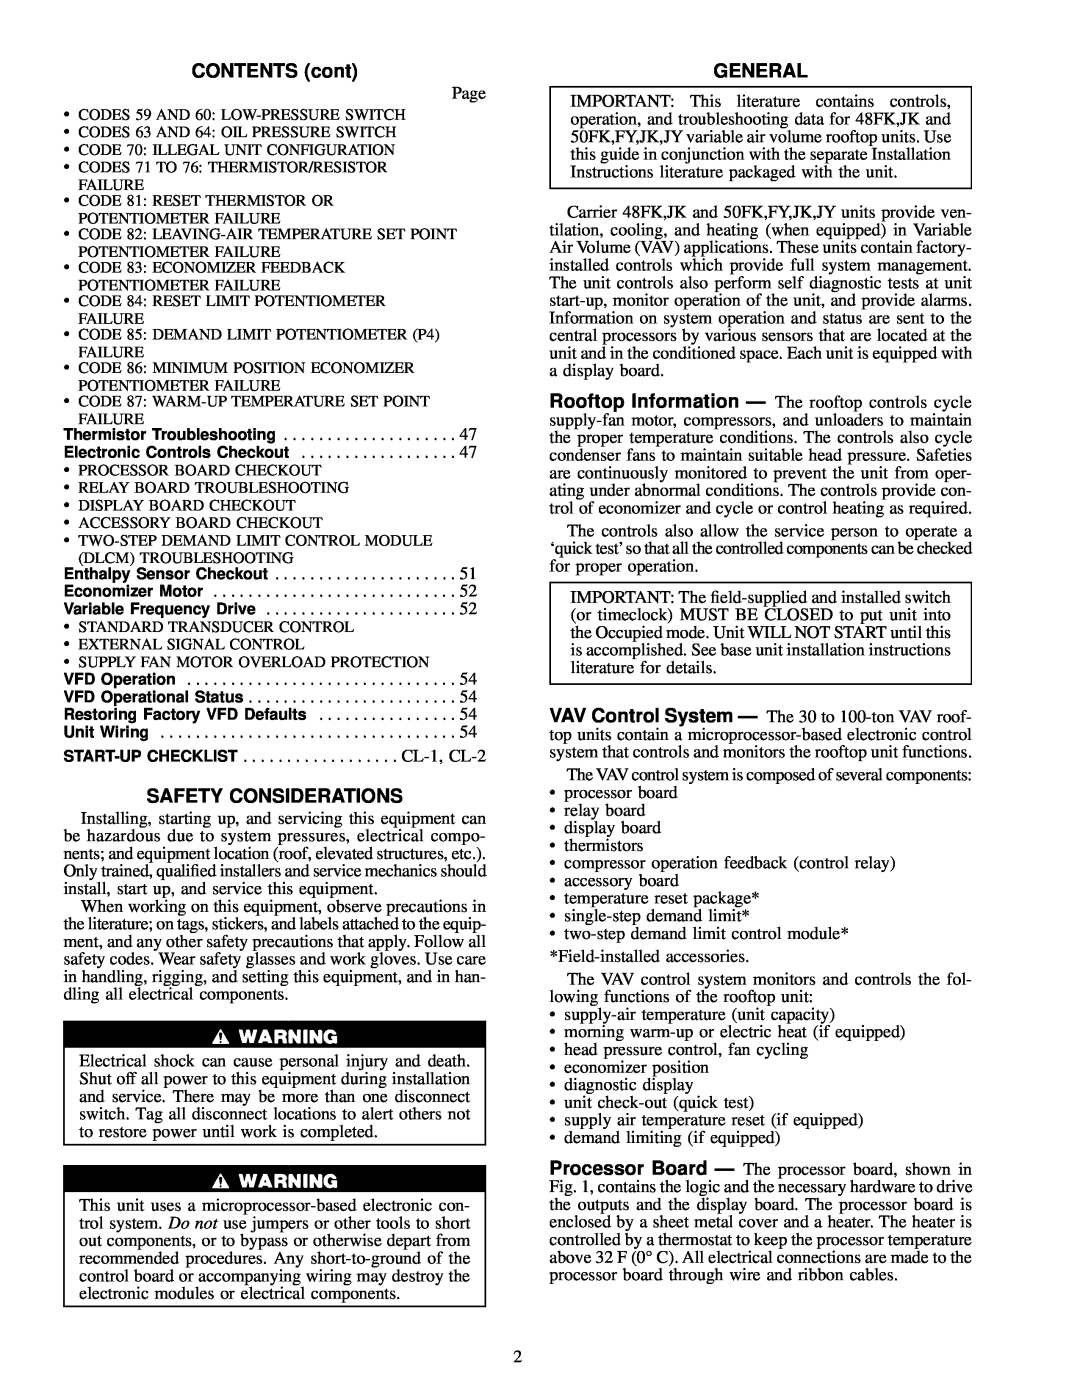 Carrier 48FK, JK034-074, 50FK specifications CONTENTS cont, Safety Considerations, General 